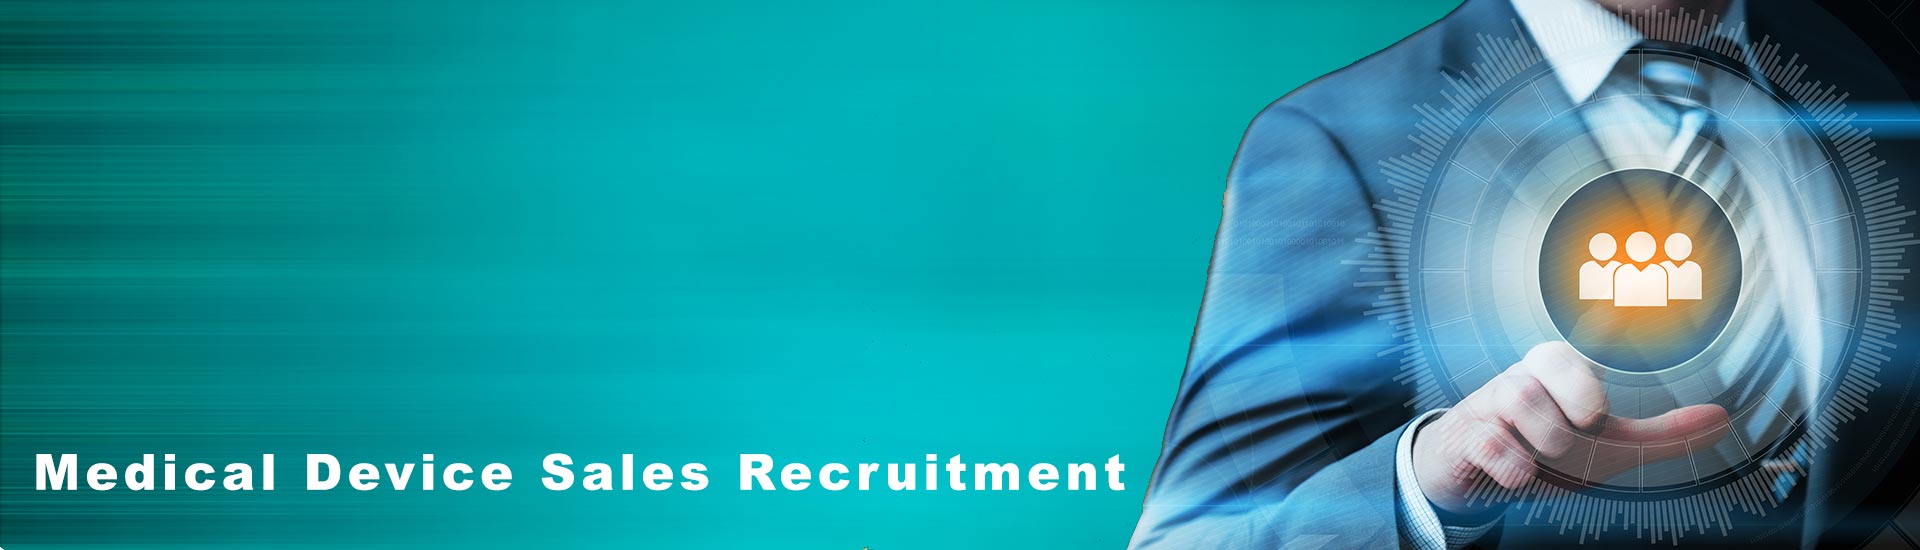 Medical Device Sales Recruitment